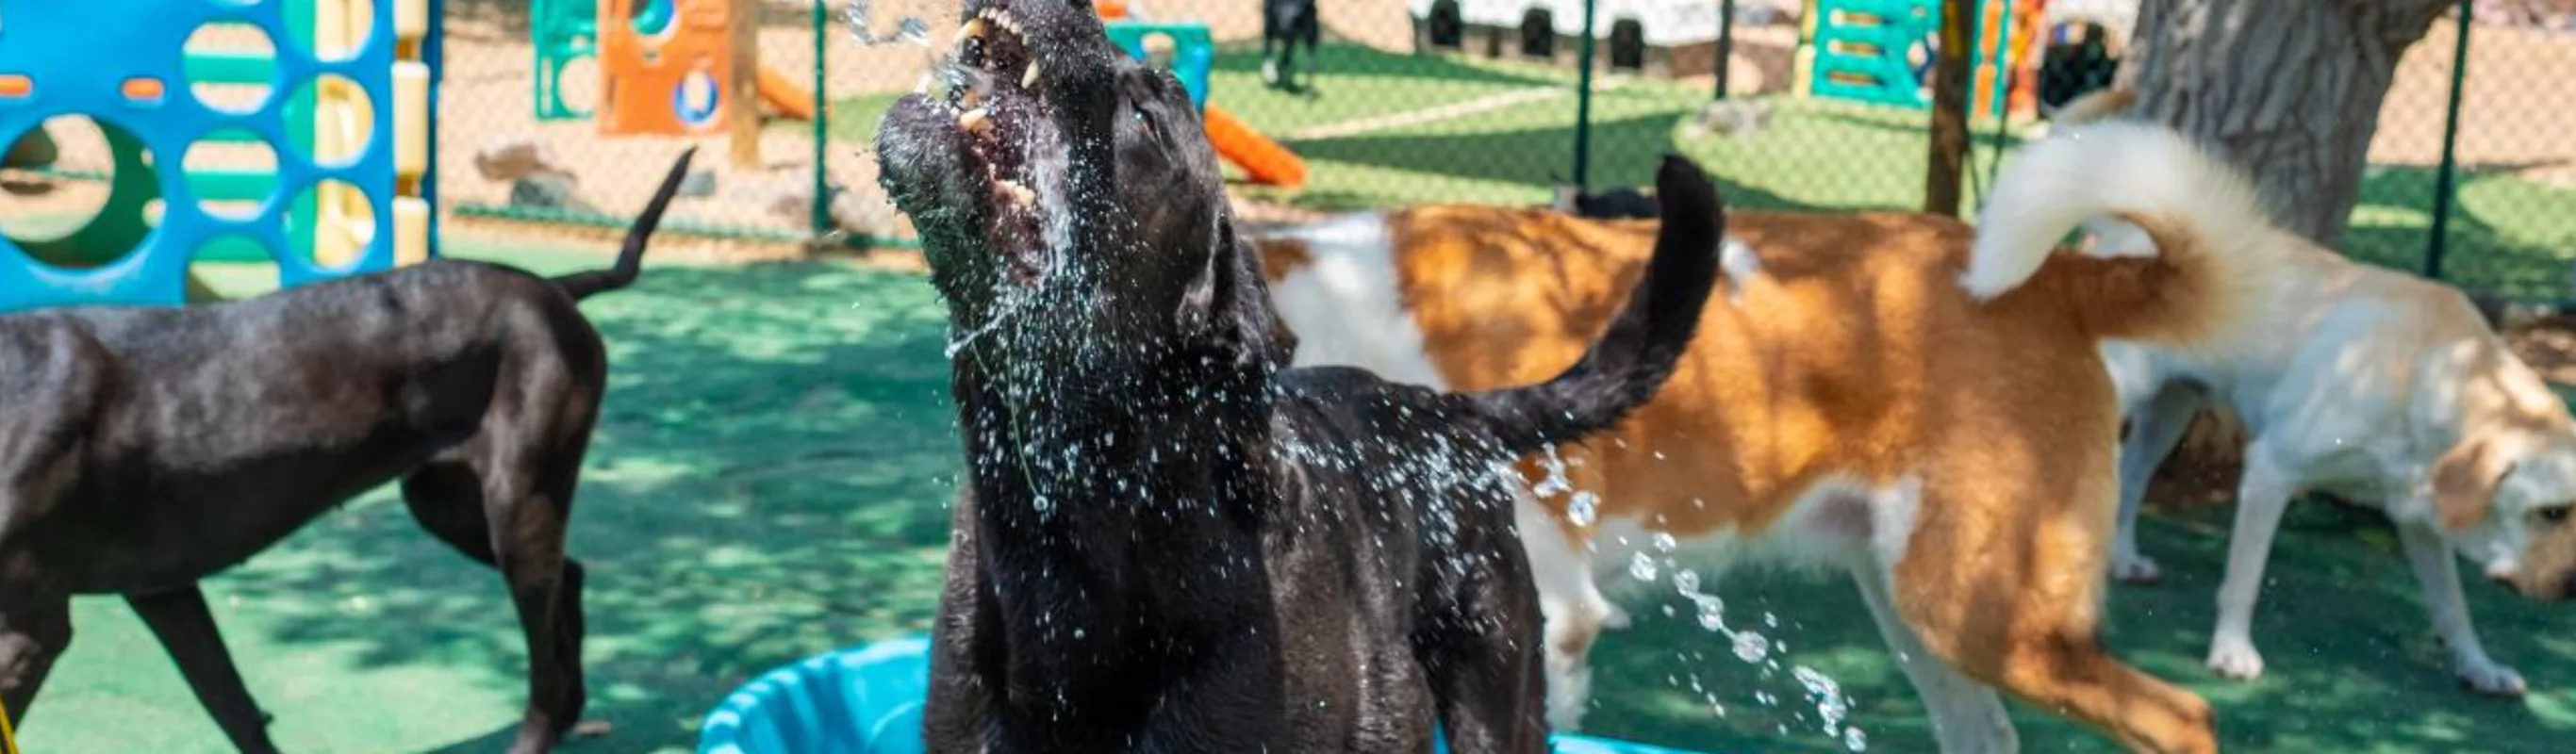 Dog being sprayed with water at Bowhaus Erie dog daycare and boarding